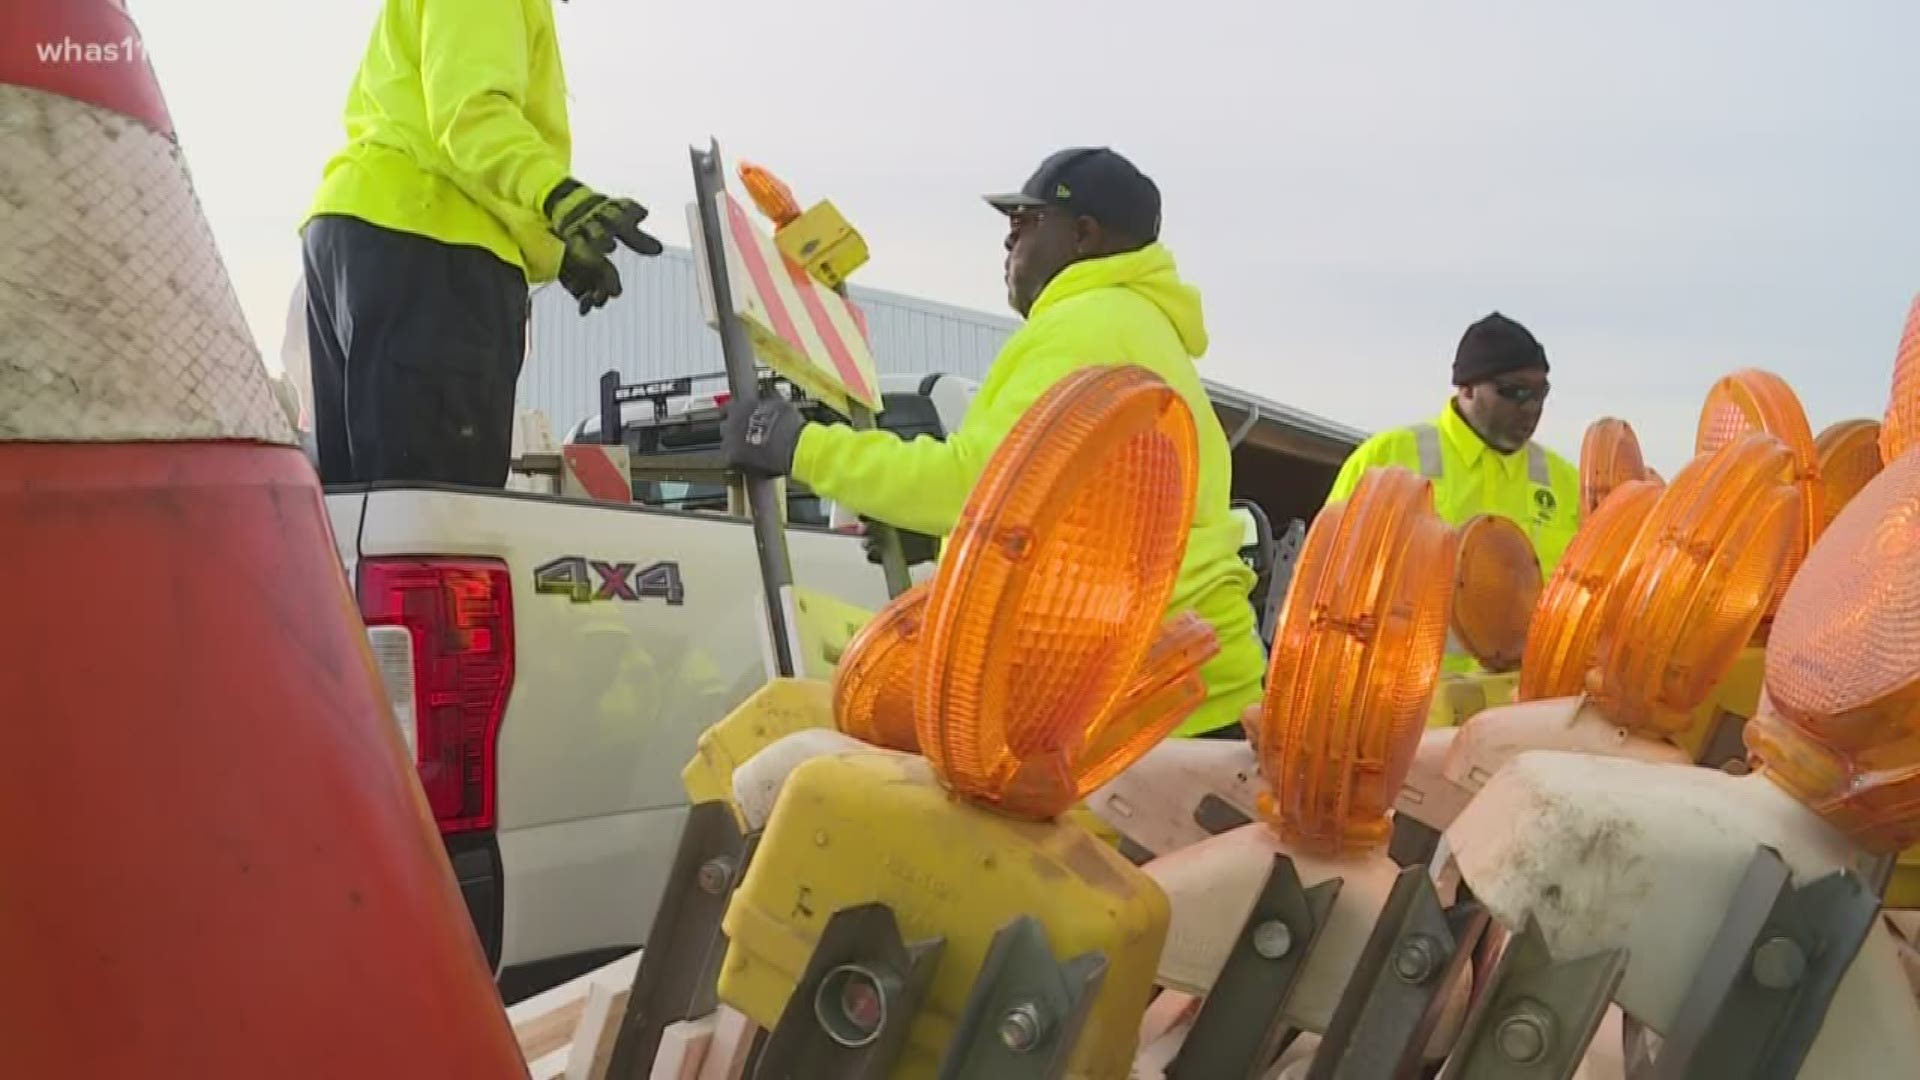 Crews from Public Works and MSD are preparing for potential flooding this weekend in Louisville